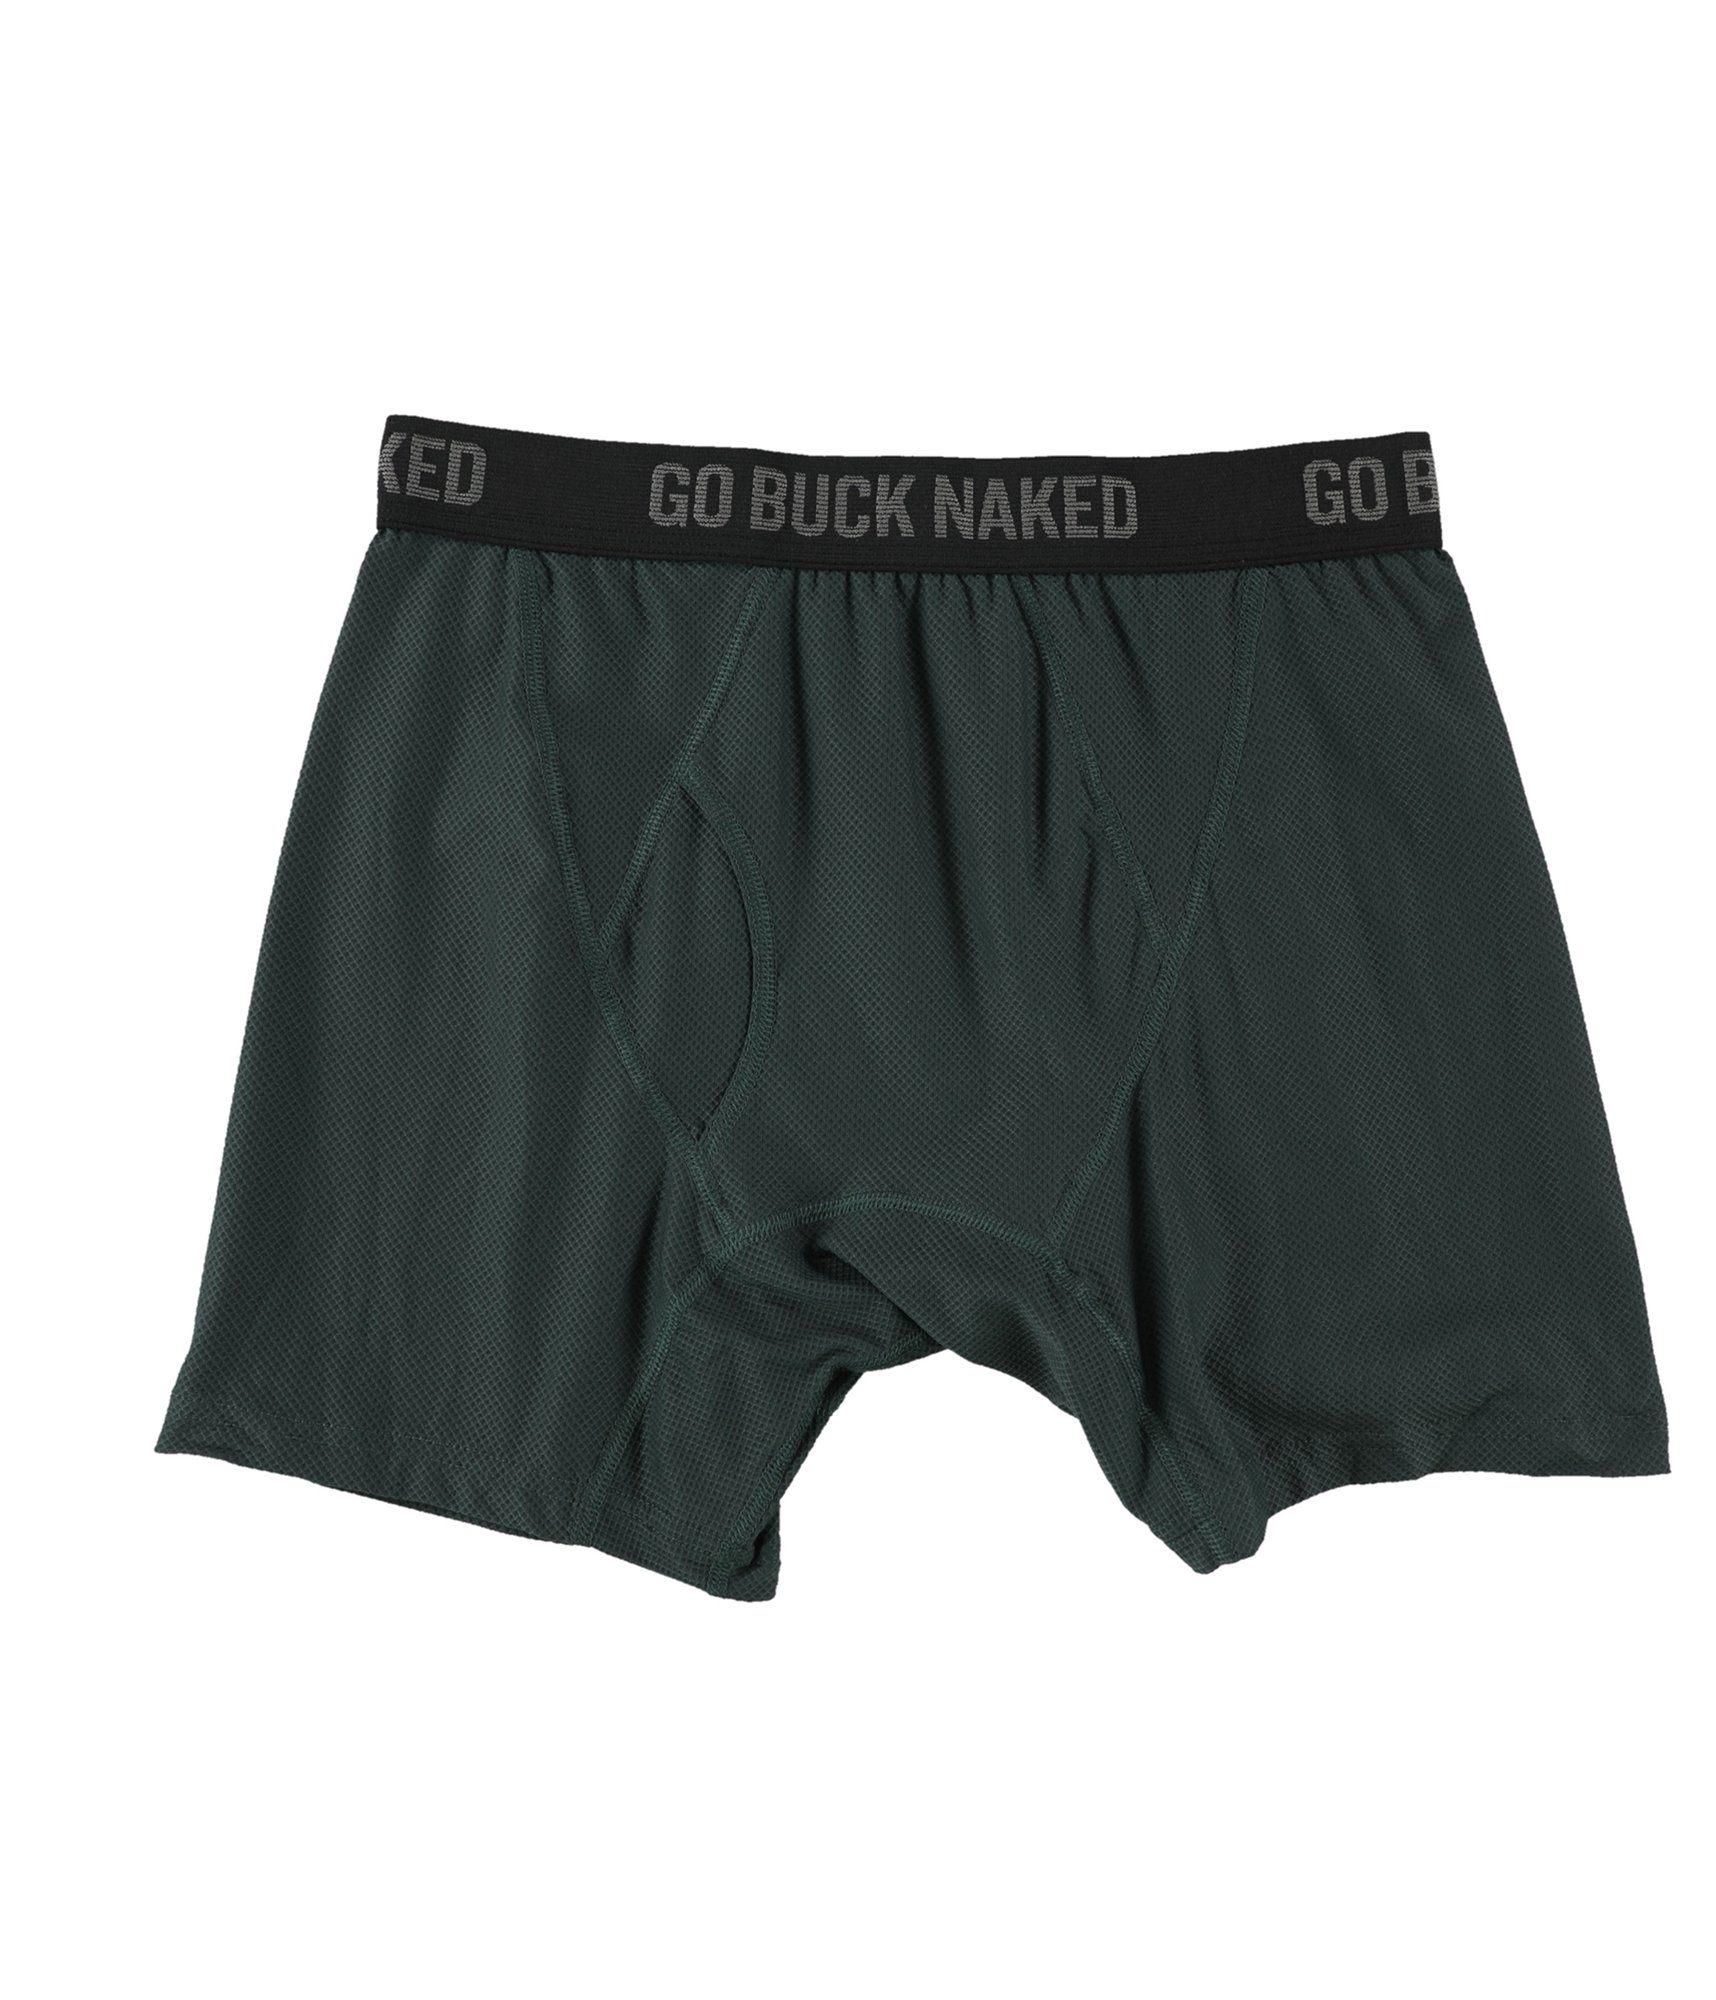 Buy a Duluth Trading Company Mens Go Buck Naked Underwear Boxer Briefs